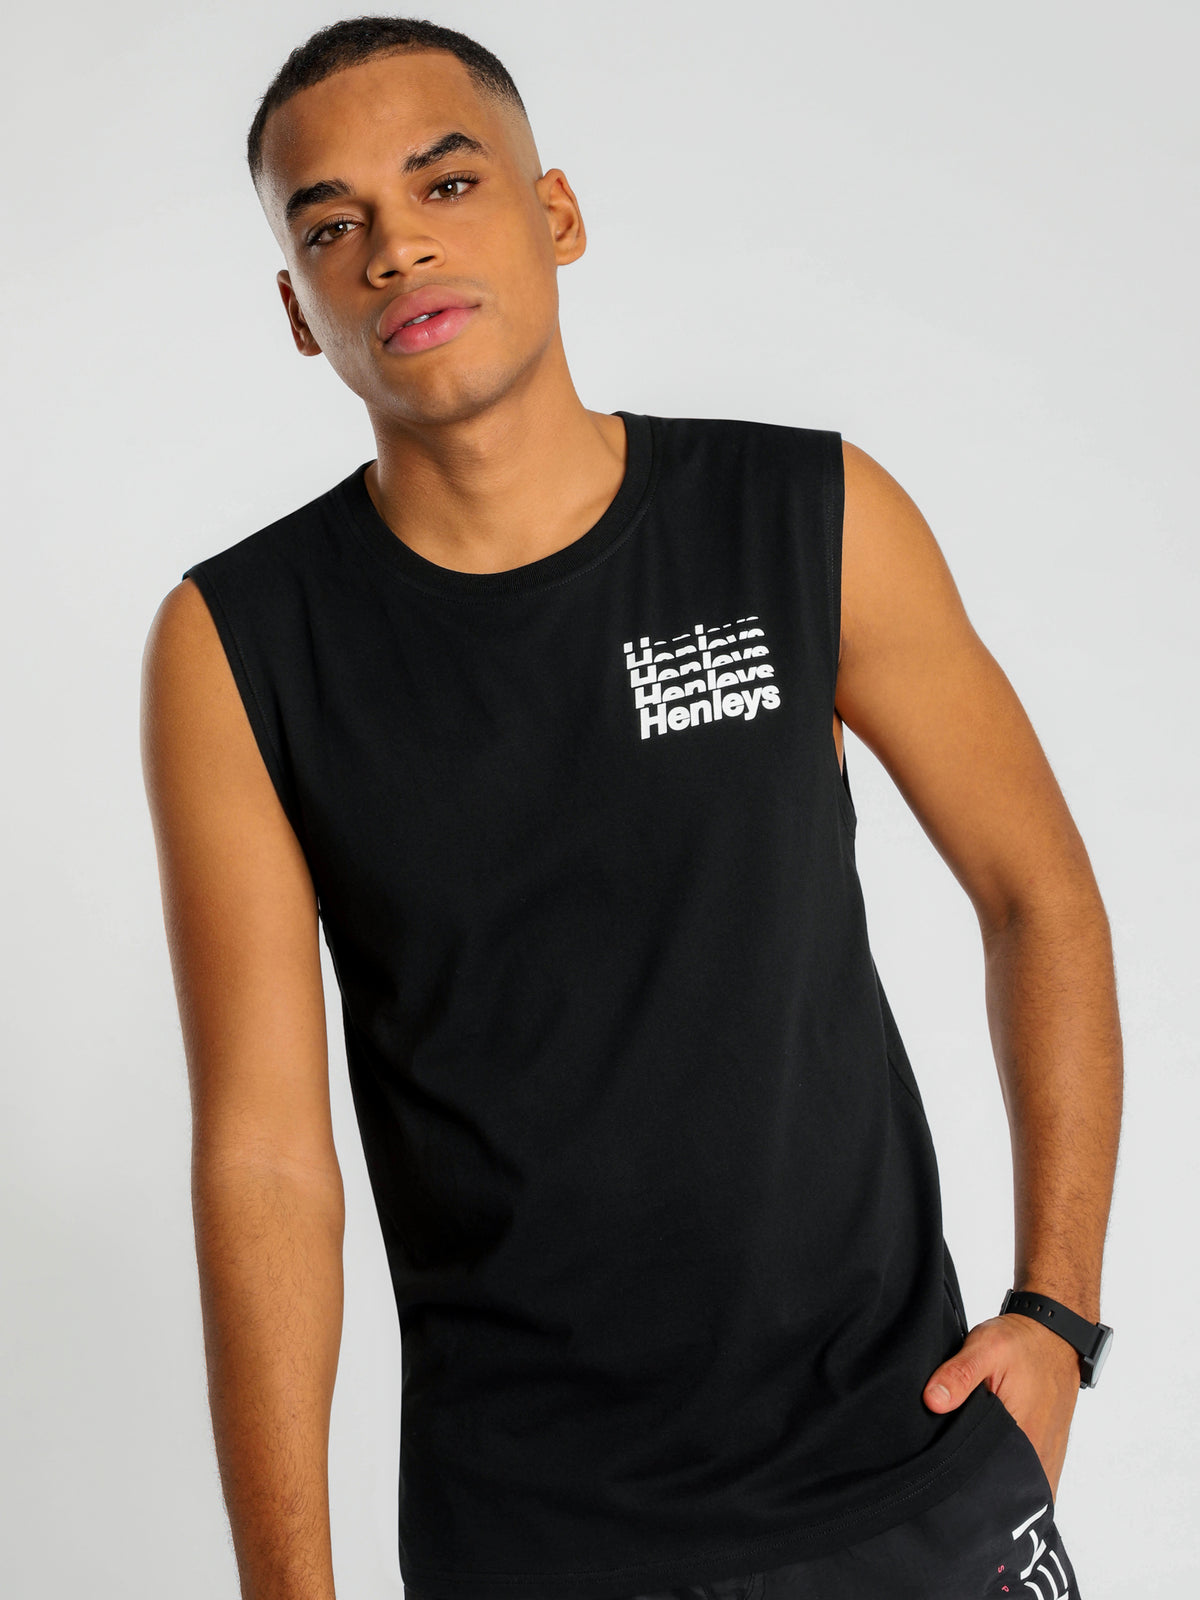 Quinton Muscle Tank in Black